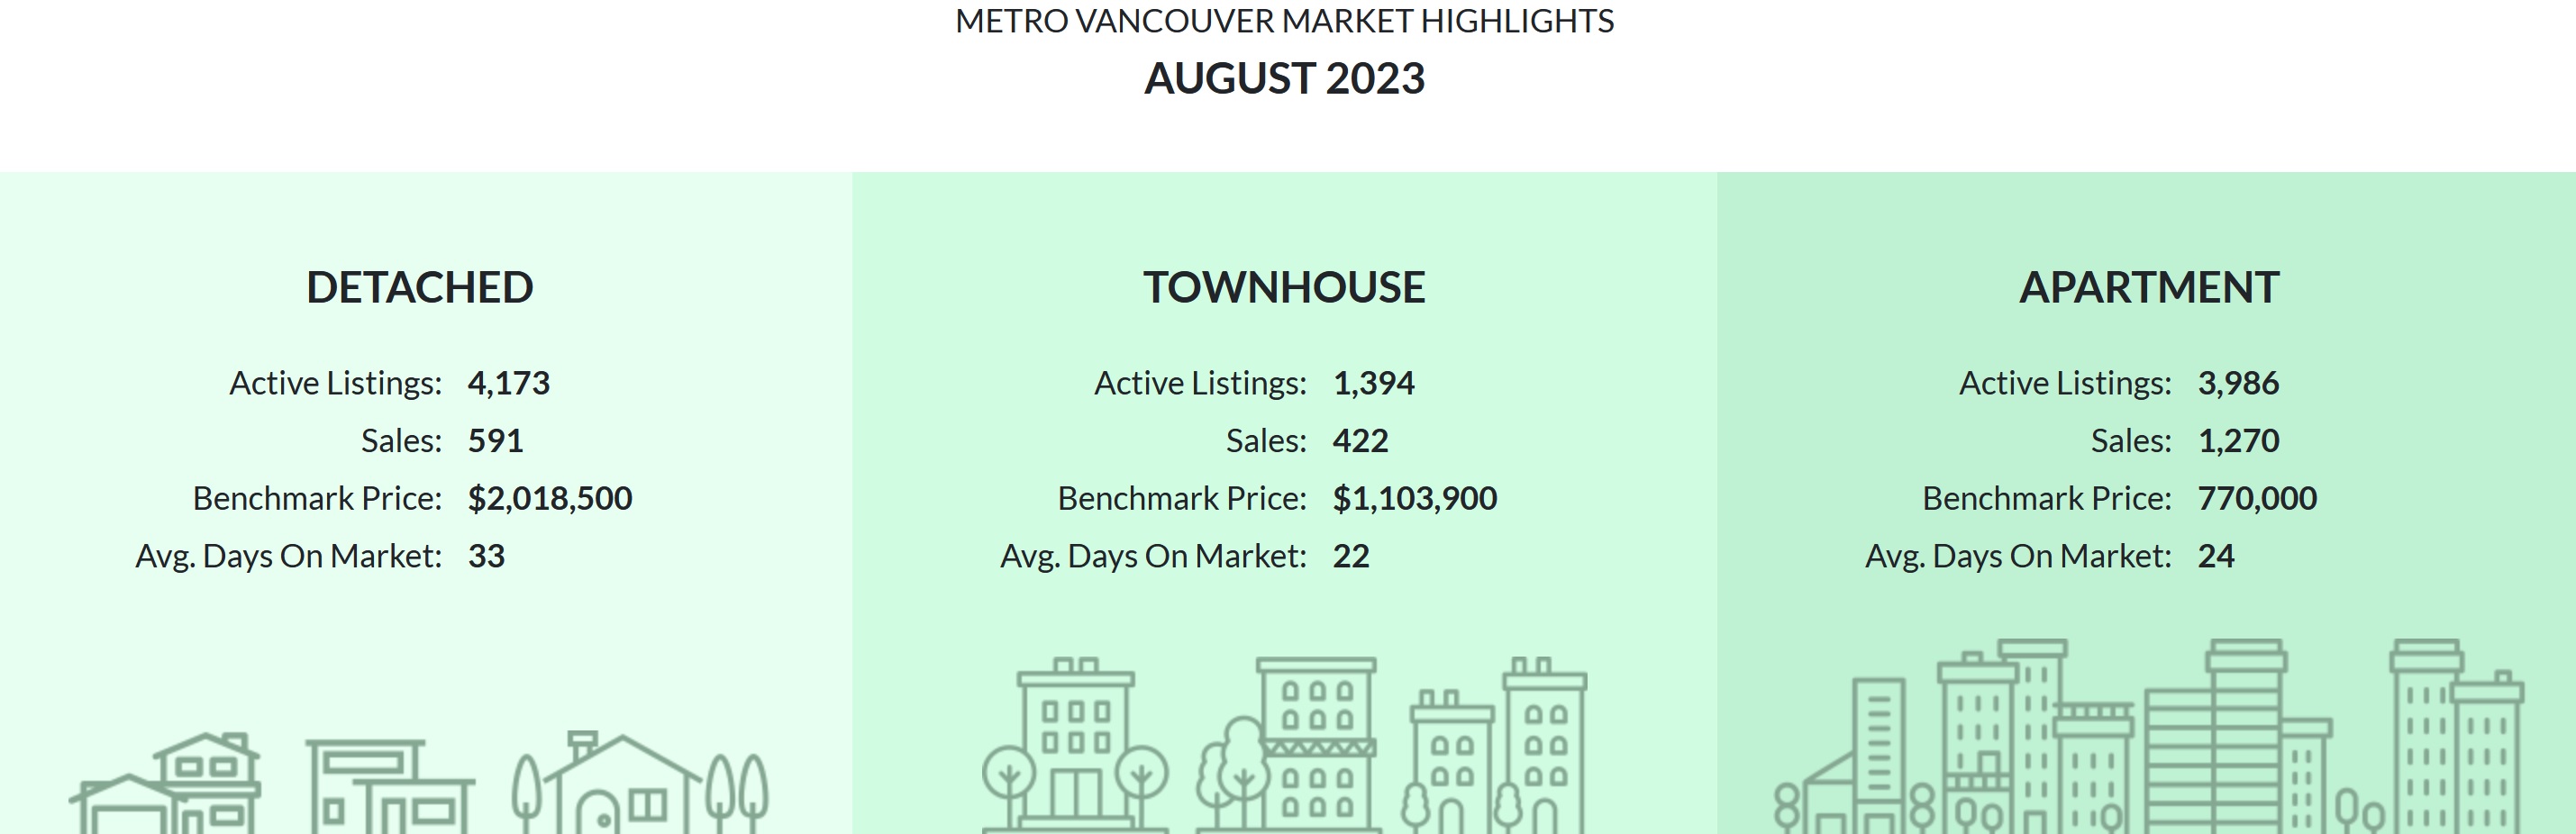 Metro Vancouver Market Highlights August 2023